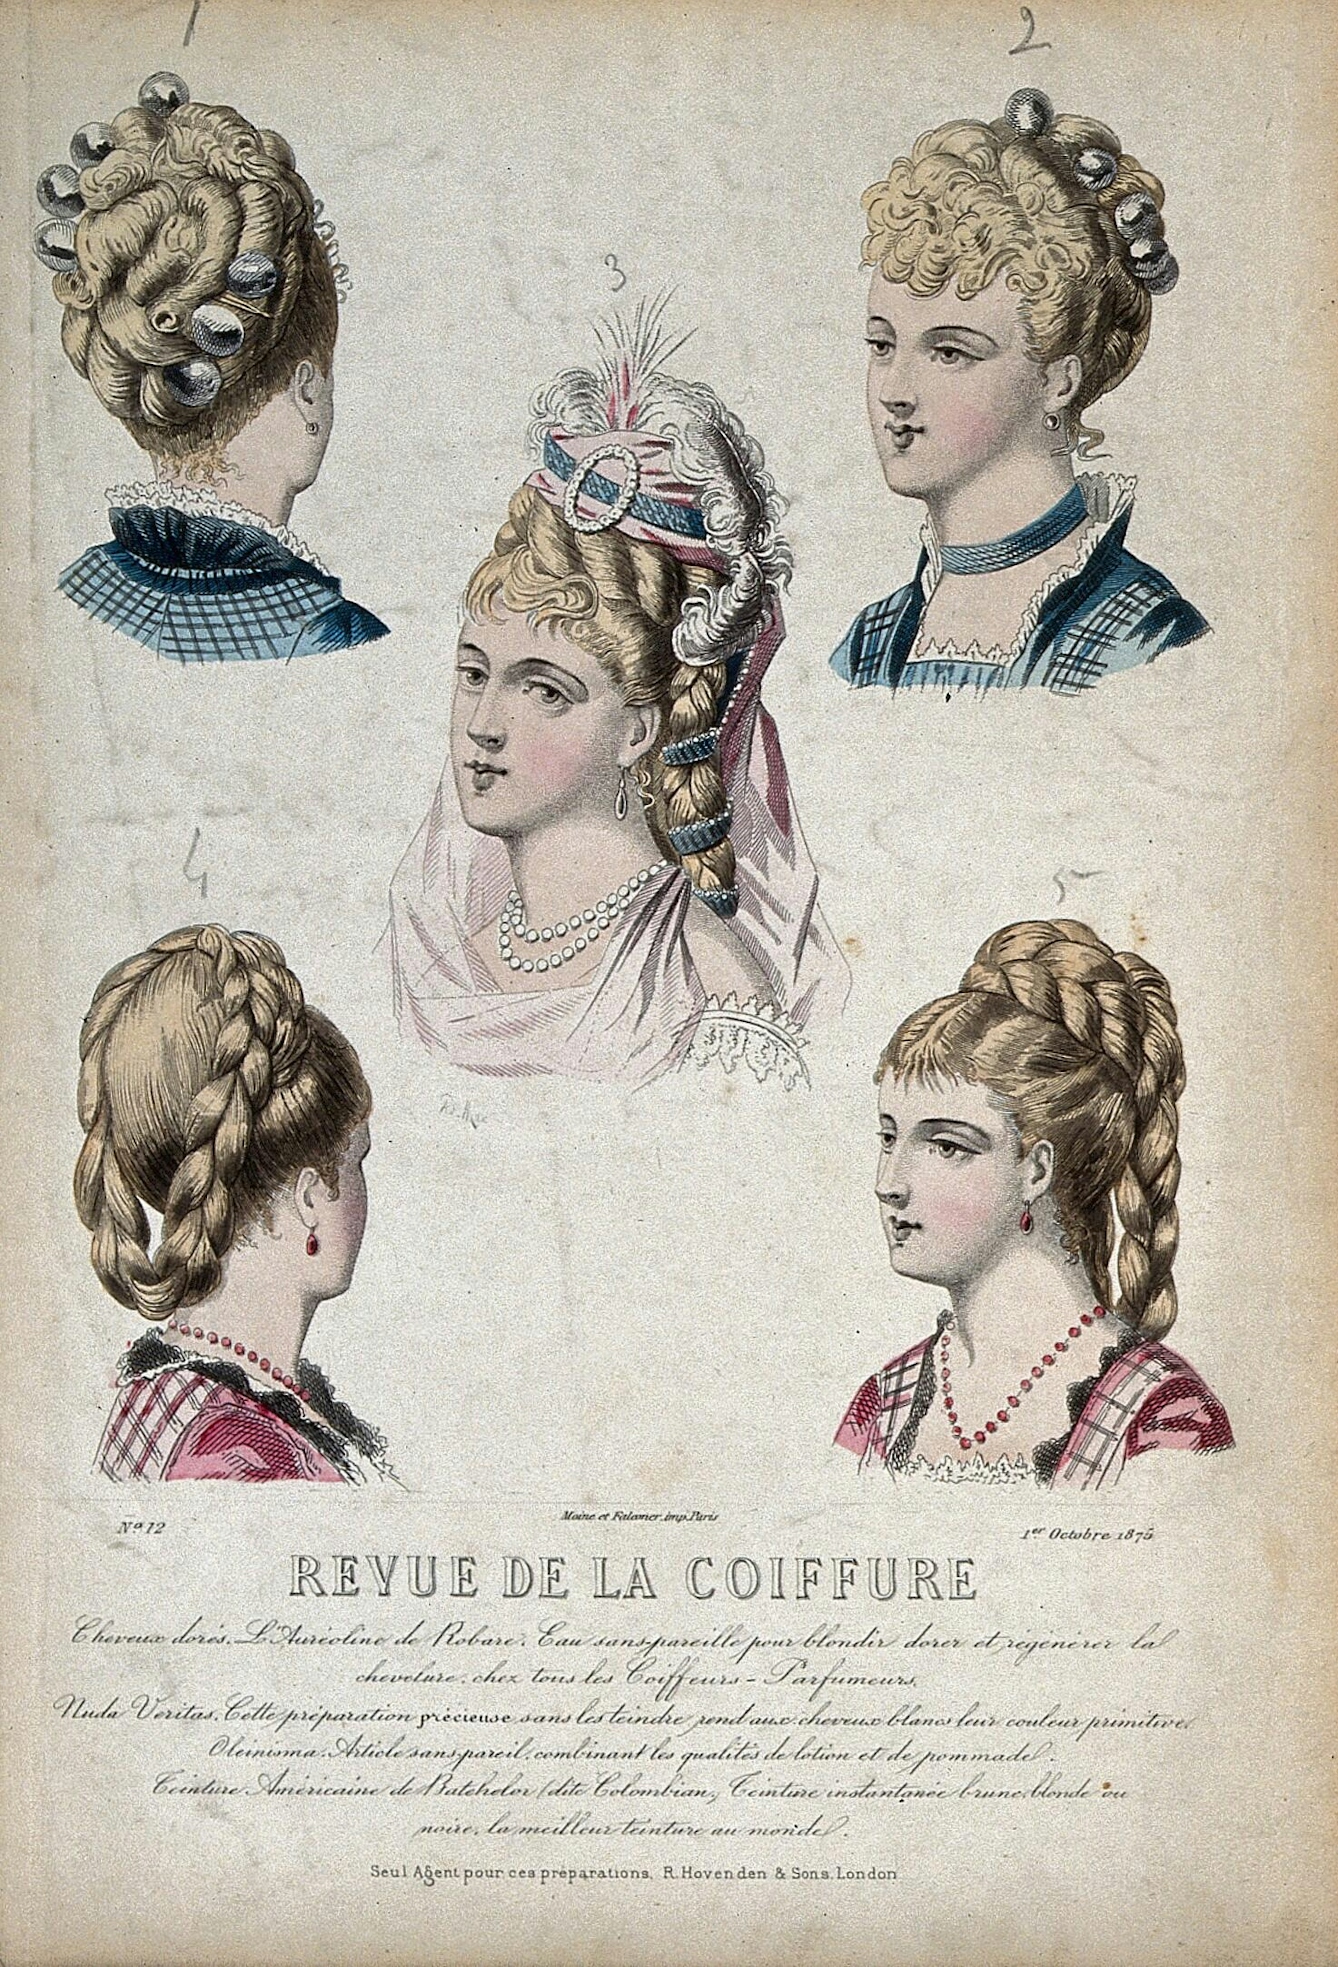 Colour illustration showing the heads and shoulders of three different white women with blonde hair.  There are five images in total - three facing towards the viewer, two facing away to show the back of the head. Each woman has her hair elaborately styled with plaits and chignons.